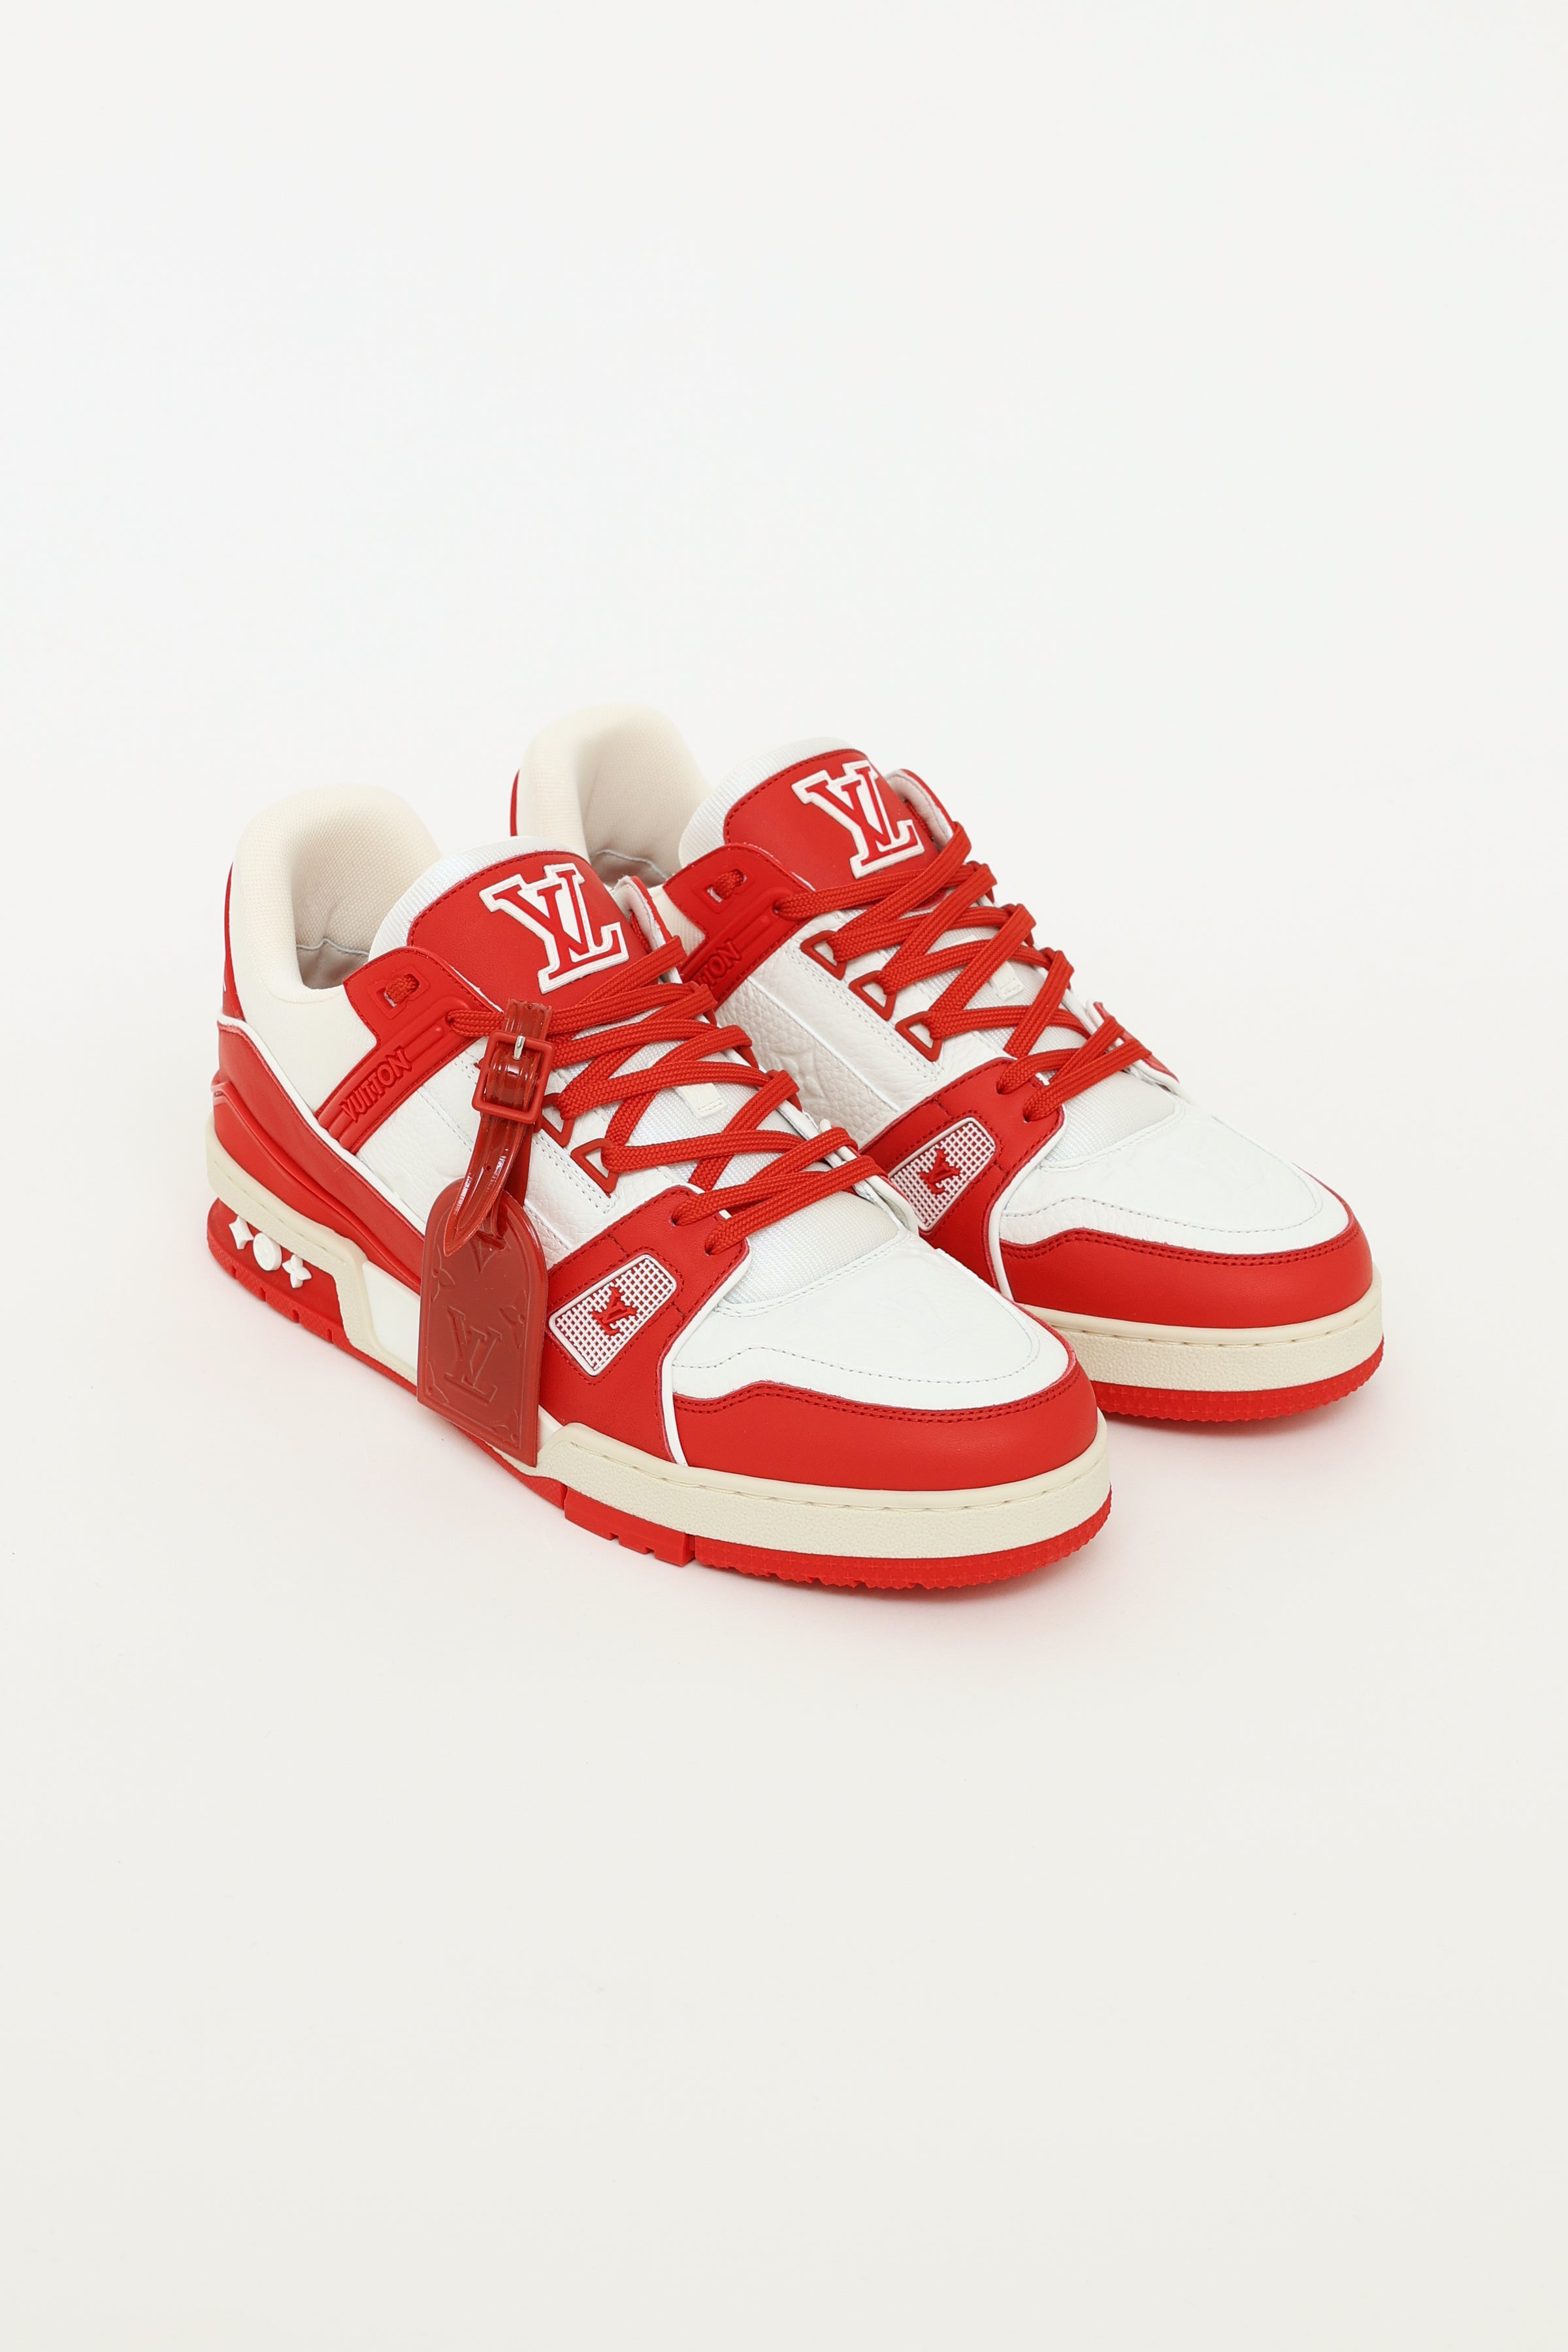 Louis Vuitton x Nike - Authenticated Trainer - Leather Red for Women, Never Worn